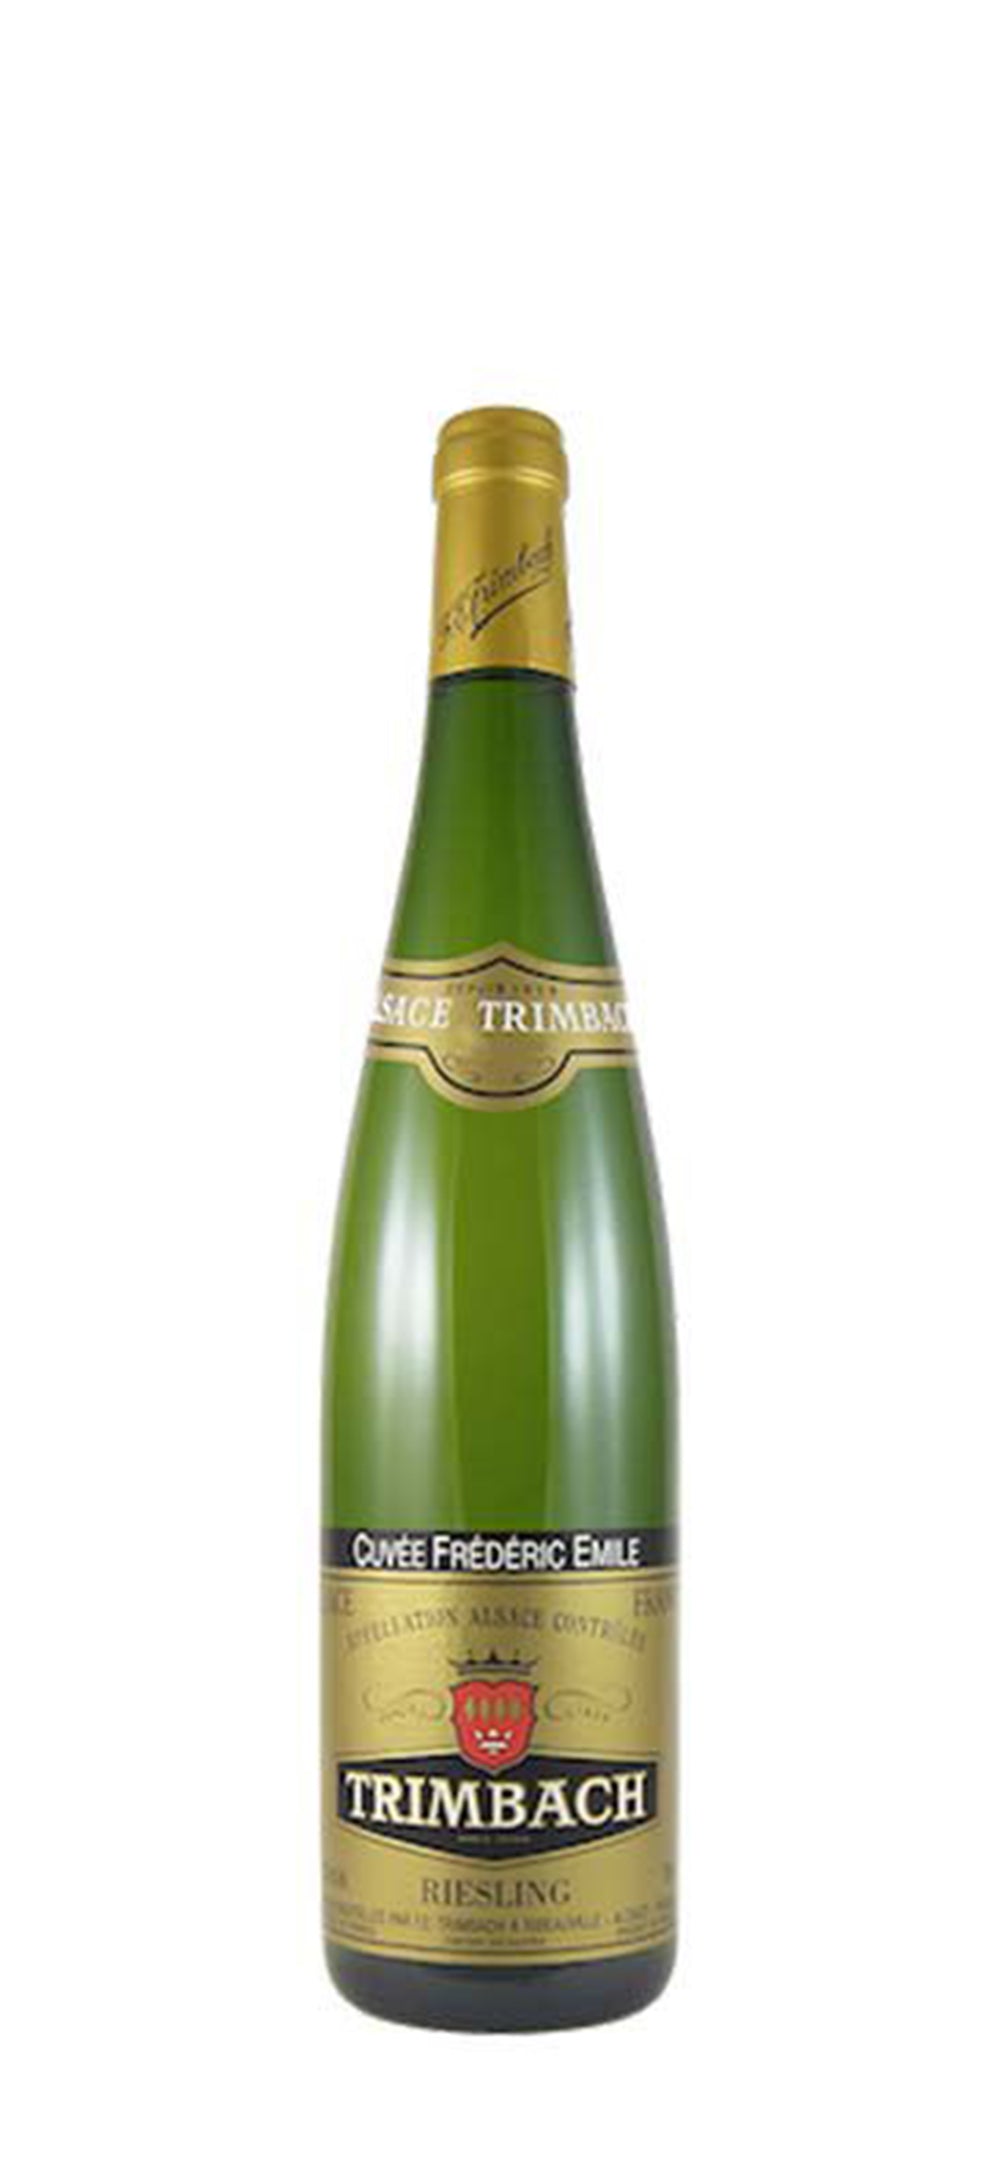 TRIMBACH Riesling Cuvée Frederic Emile 2012 - 1500ml